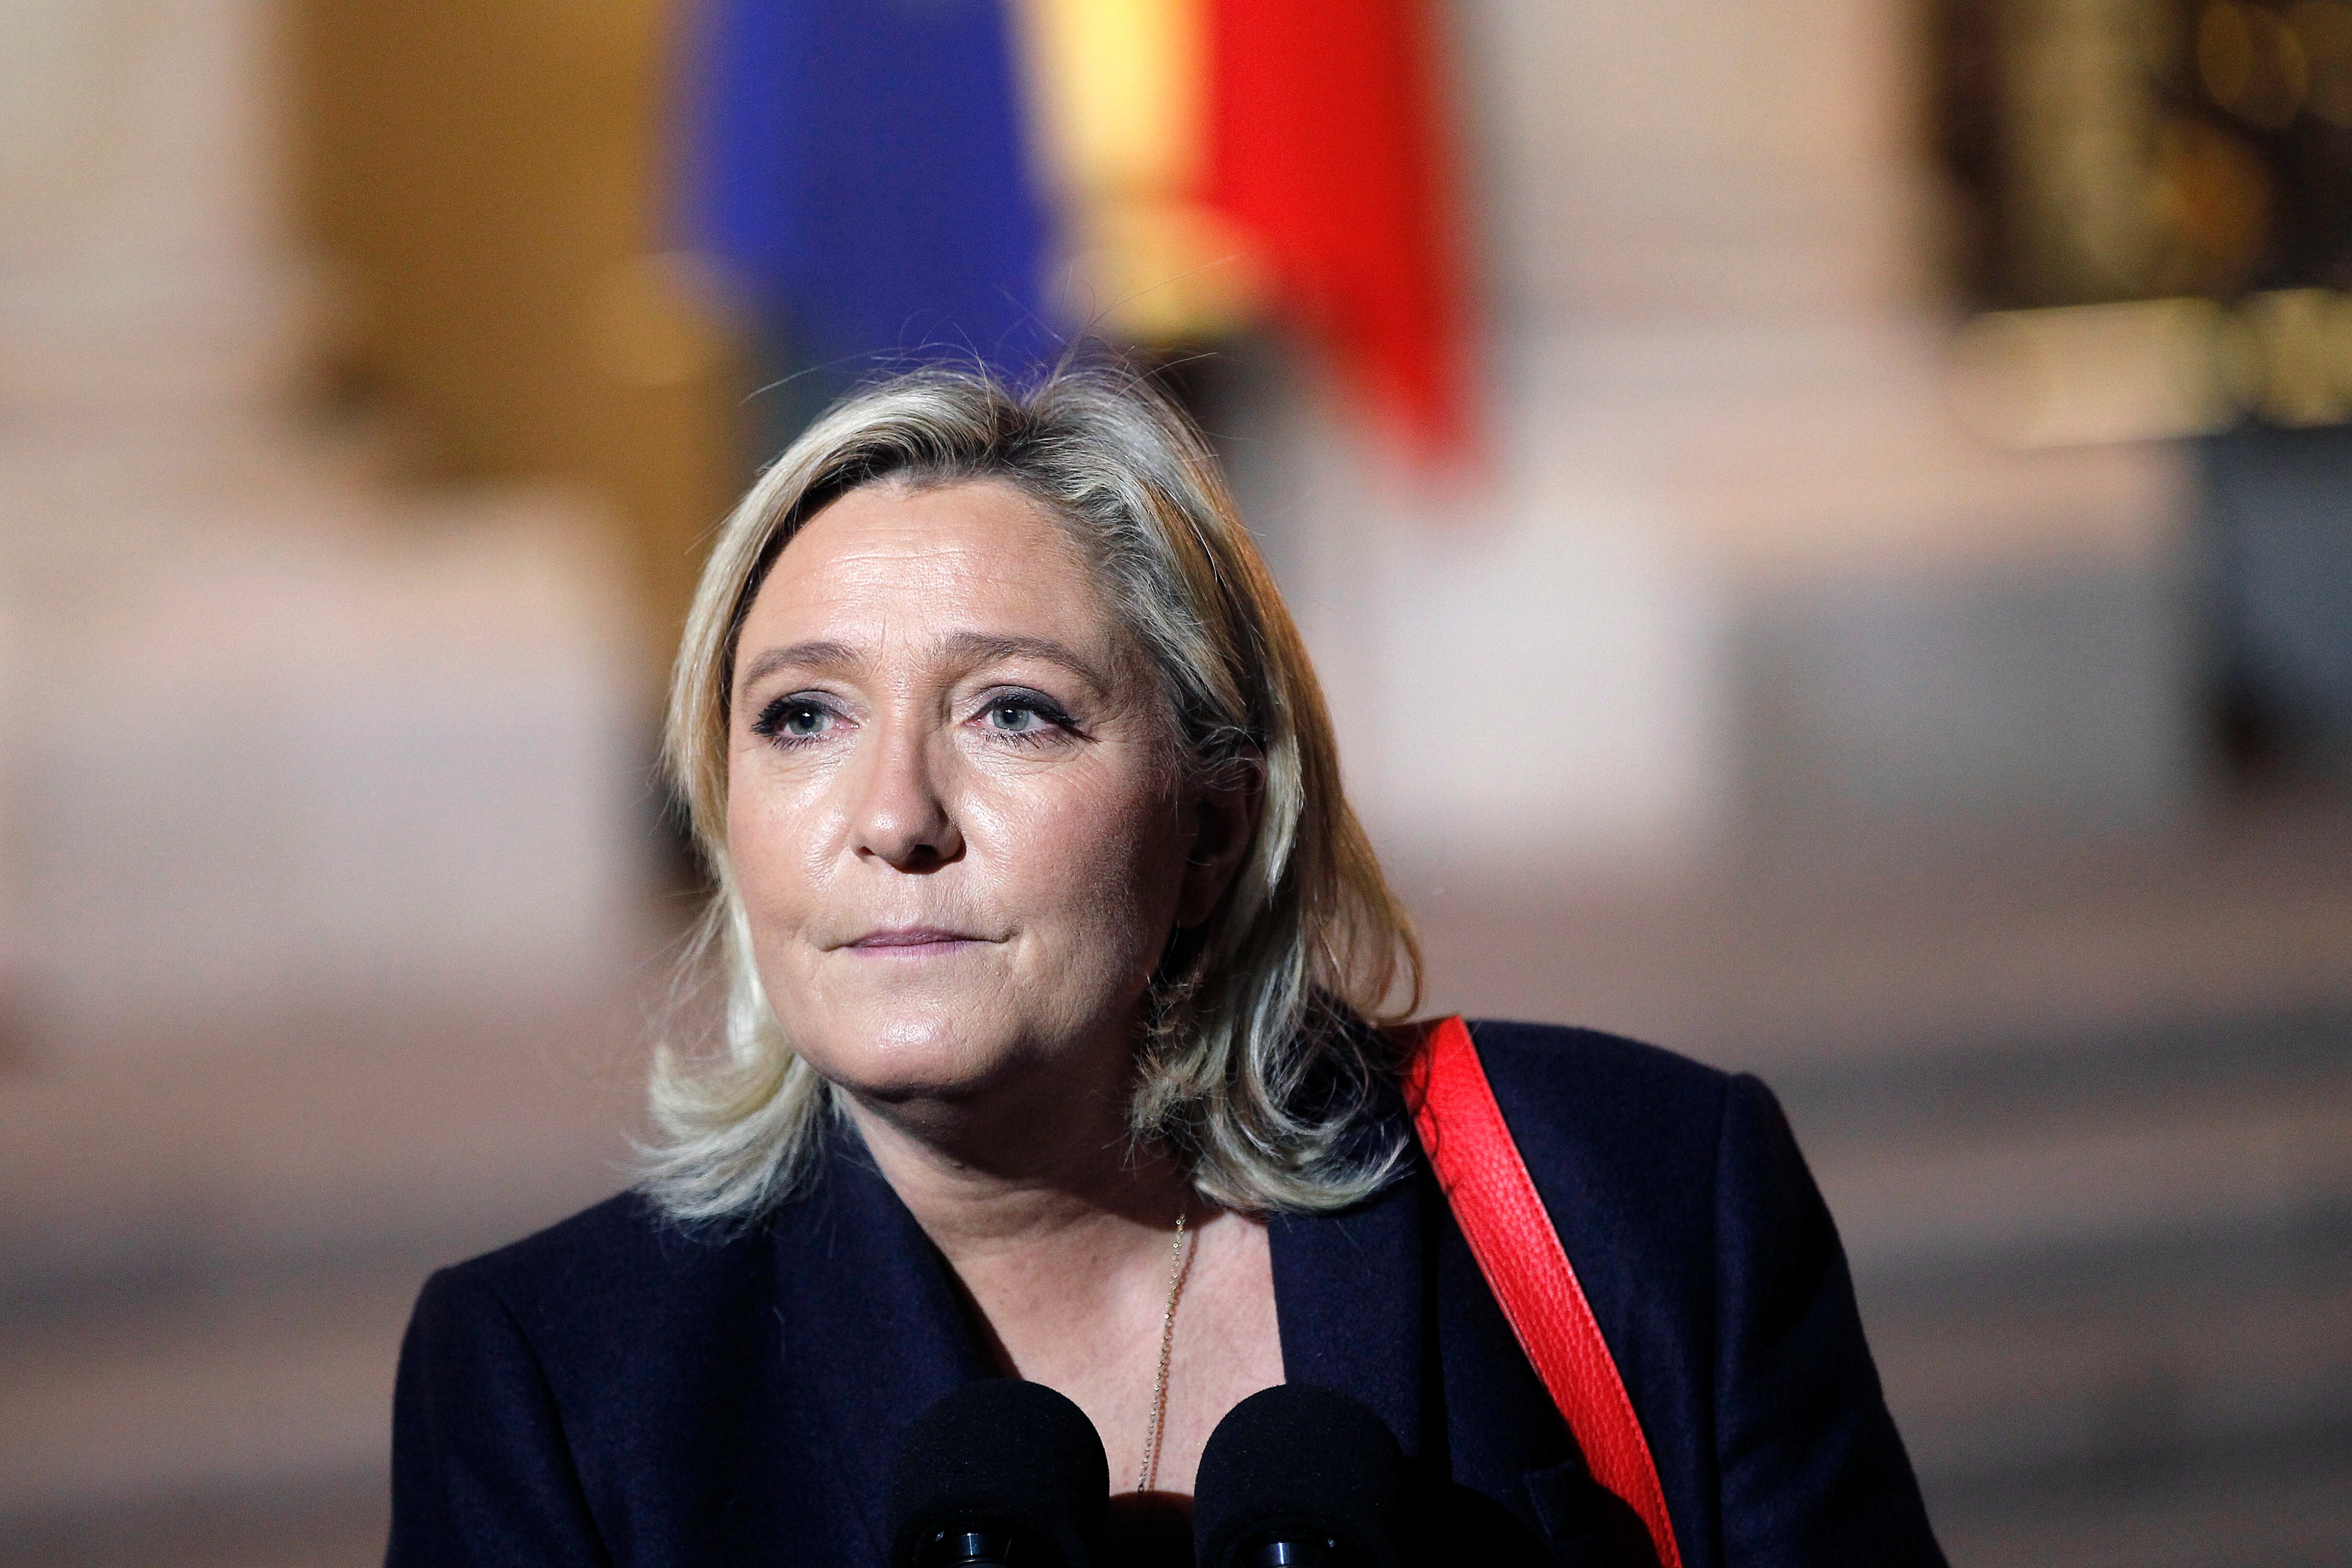 French leader of the French Far-right party Front National (FN) Marine Le Pen arrives at the Elysee Presidential Palace for a meeting with French President Francois Hollande in Paris on Nov. 15, 2015.